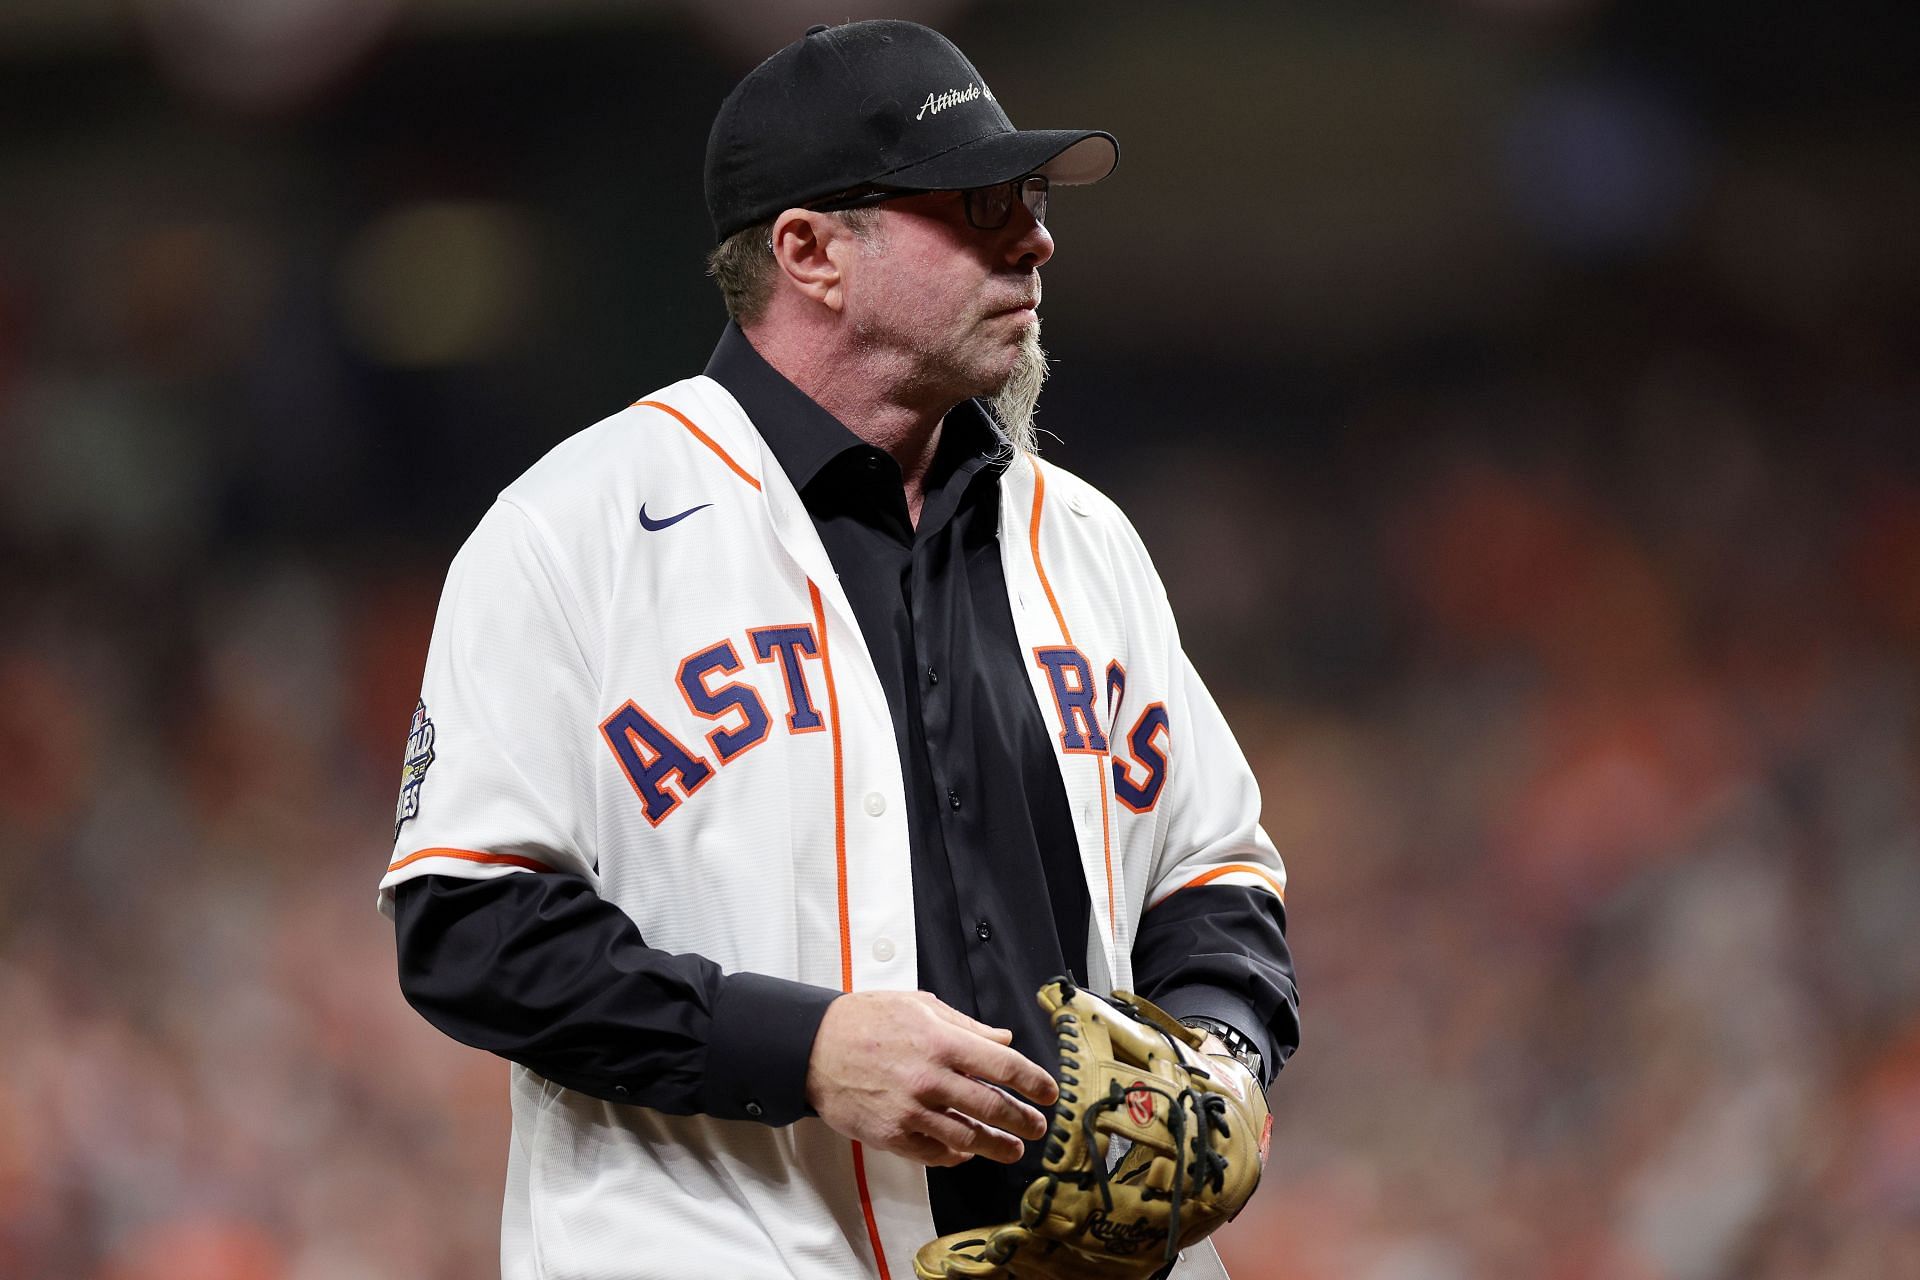 Hall of Famer Jeff Bagwell also recorded 30+ stolen bases in a single season with the Houston Astros.